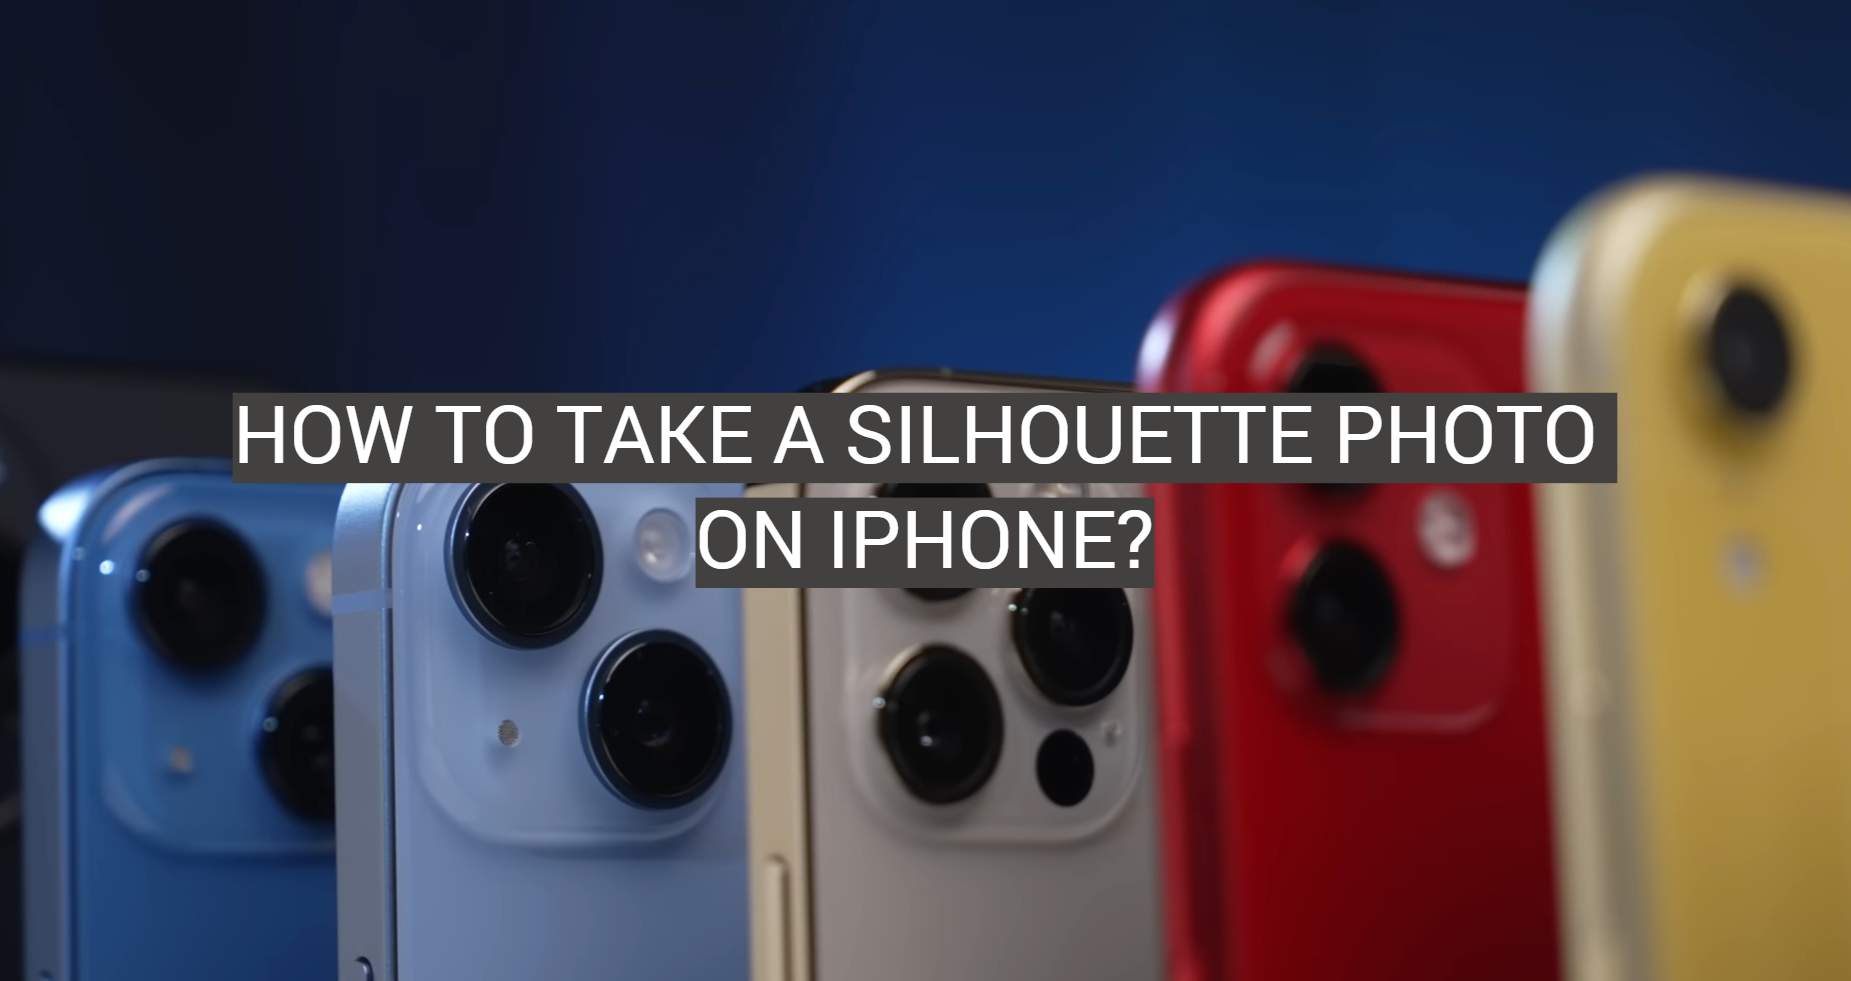 How to Take a Silhouette Photo on iPhone?